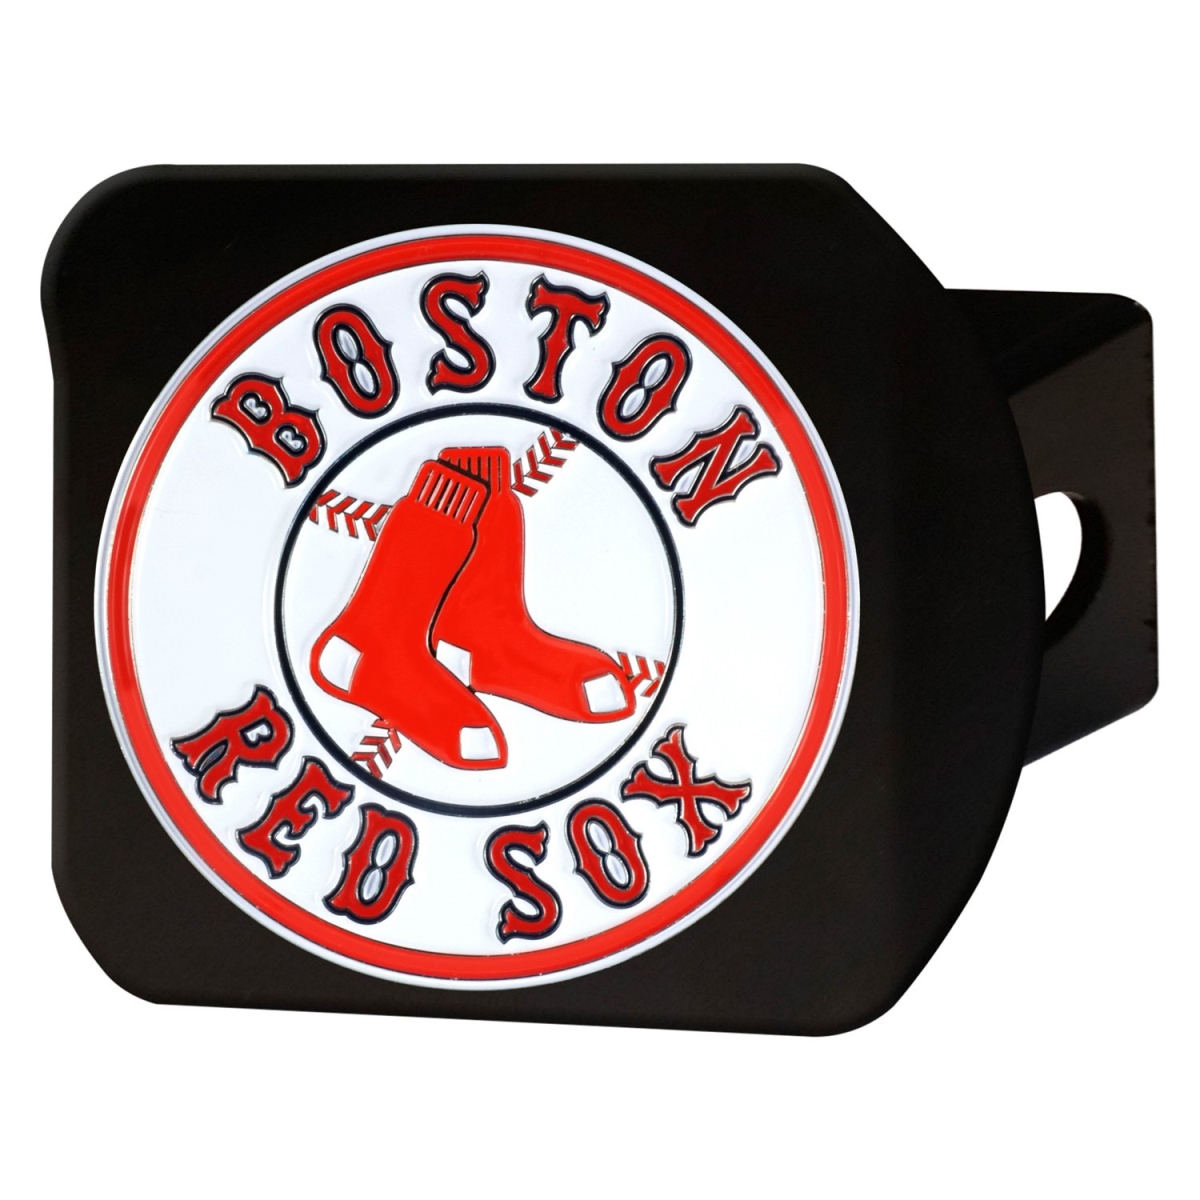 Picture of Fan Mats 26528 Sport Black MLB Hitch Cover with Boston Red Sox Logo for 2 Receivers